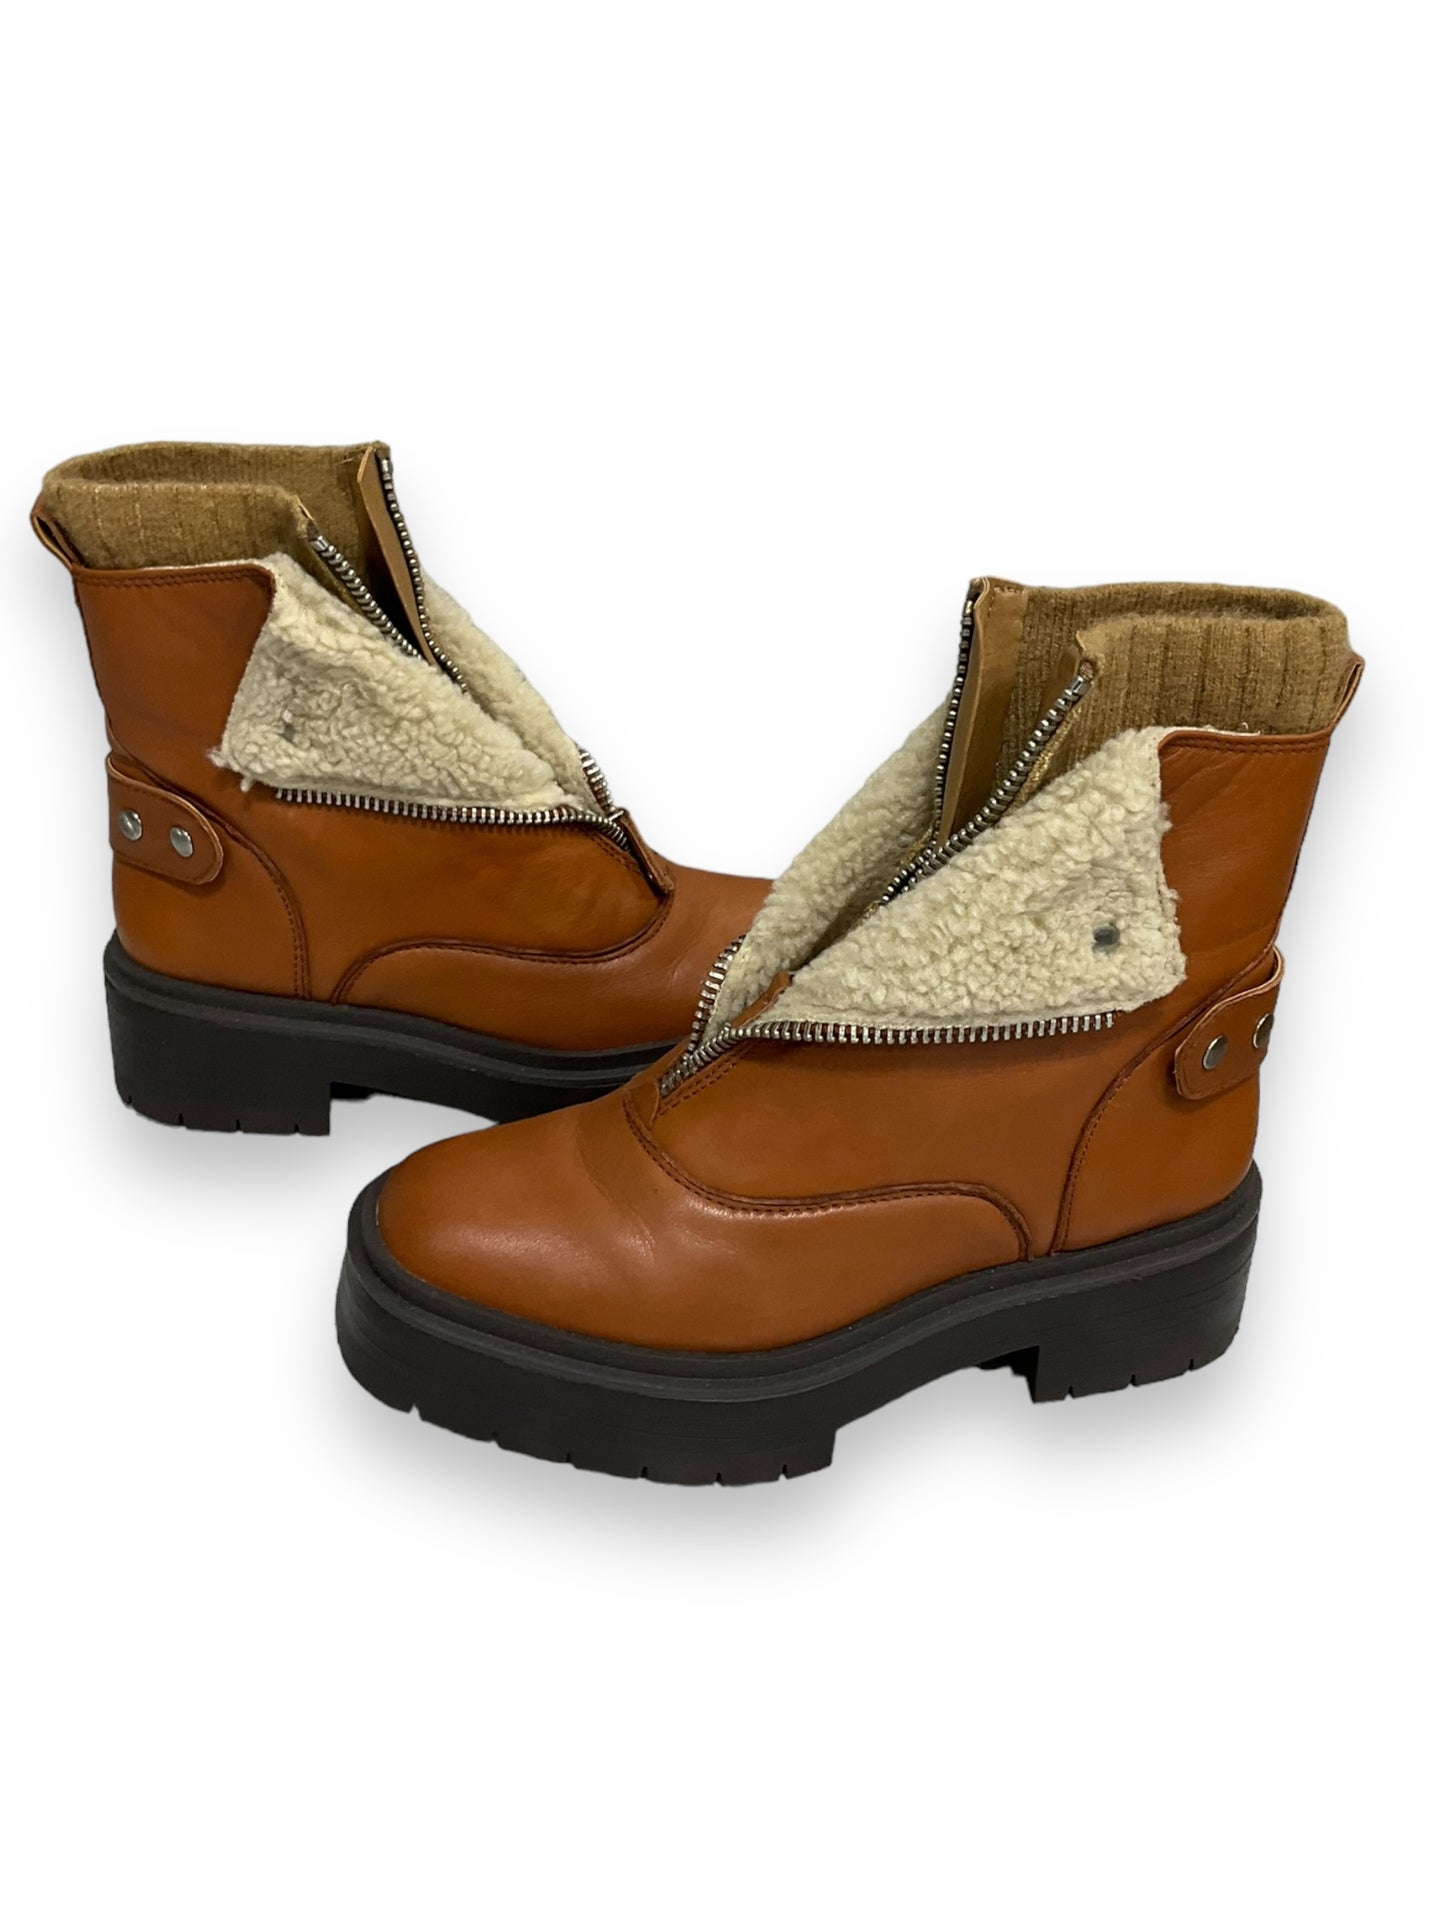 Boots Hiking By Sam Edelman  Size: 7